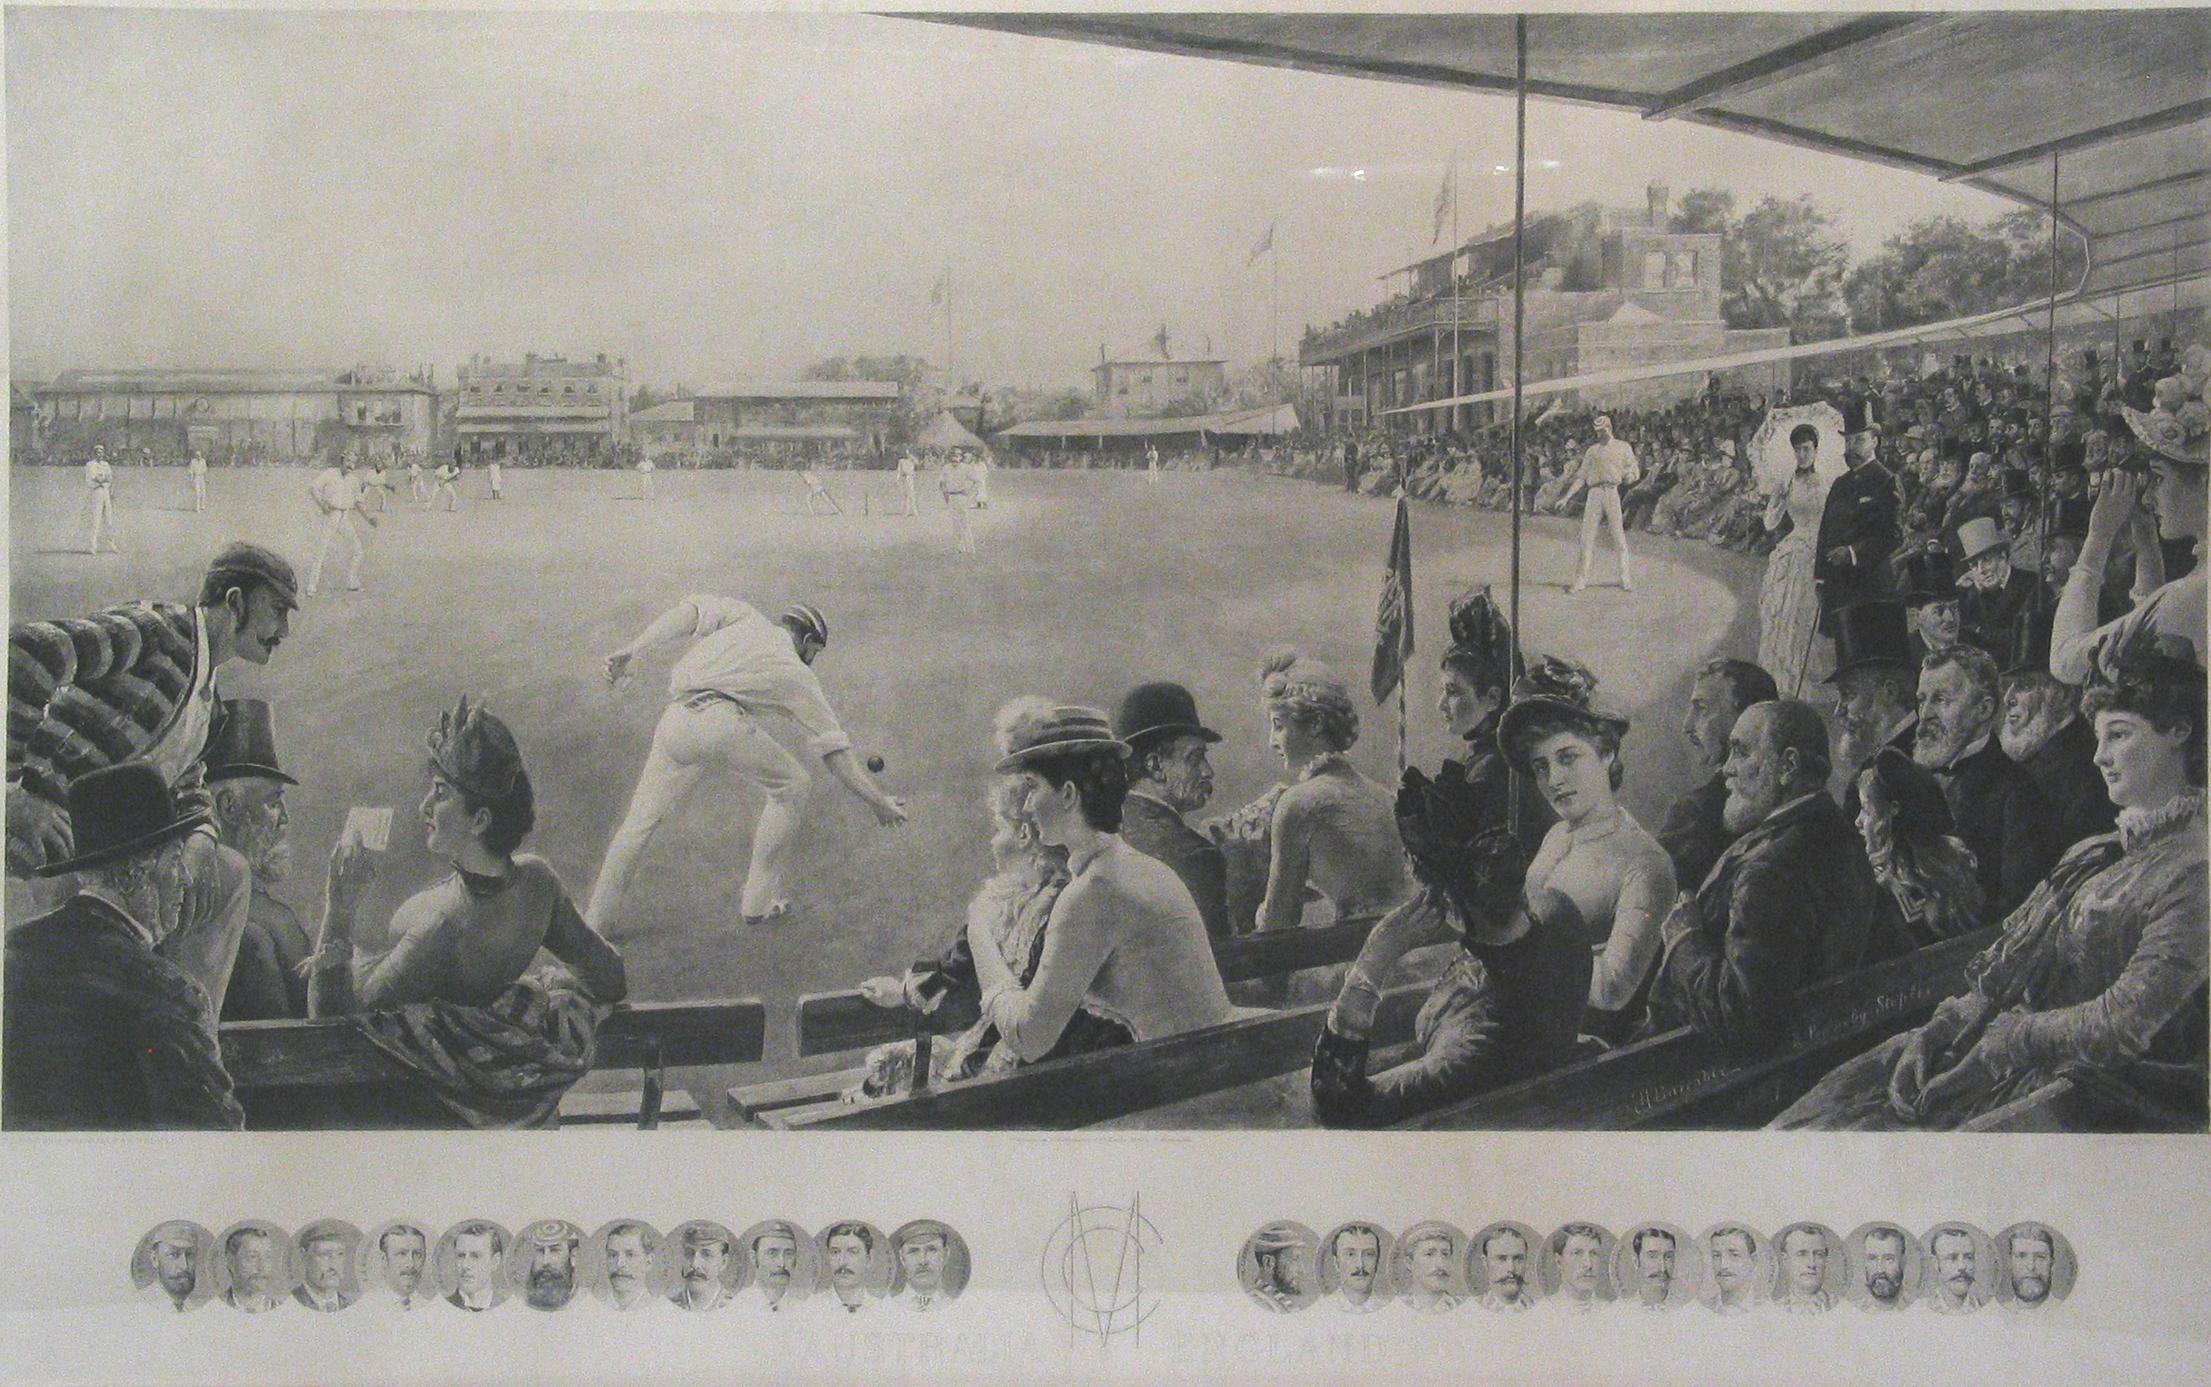 Vintage 'MCC Australia V. England' cricket photogravure.
This is a magnificent photogravure of a fictitious cricket match at Lords en-titled 'MCC Australia v England'. The original painting is by G. H. Barrable and R. Ponsonby Staples. The